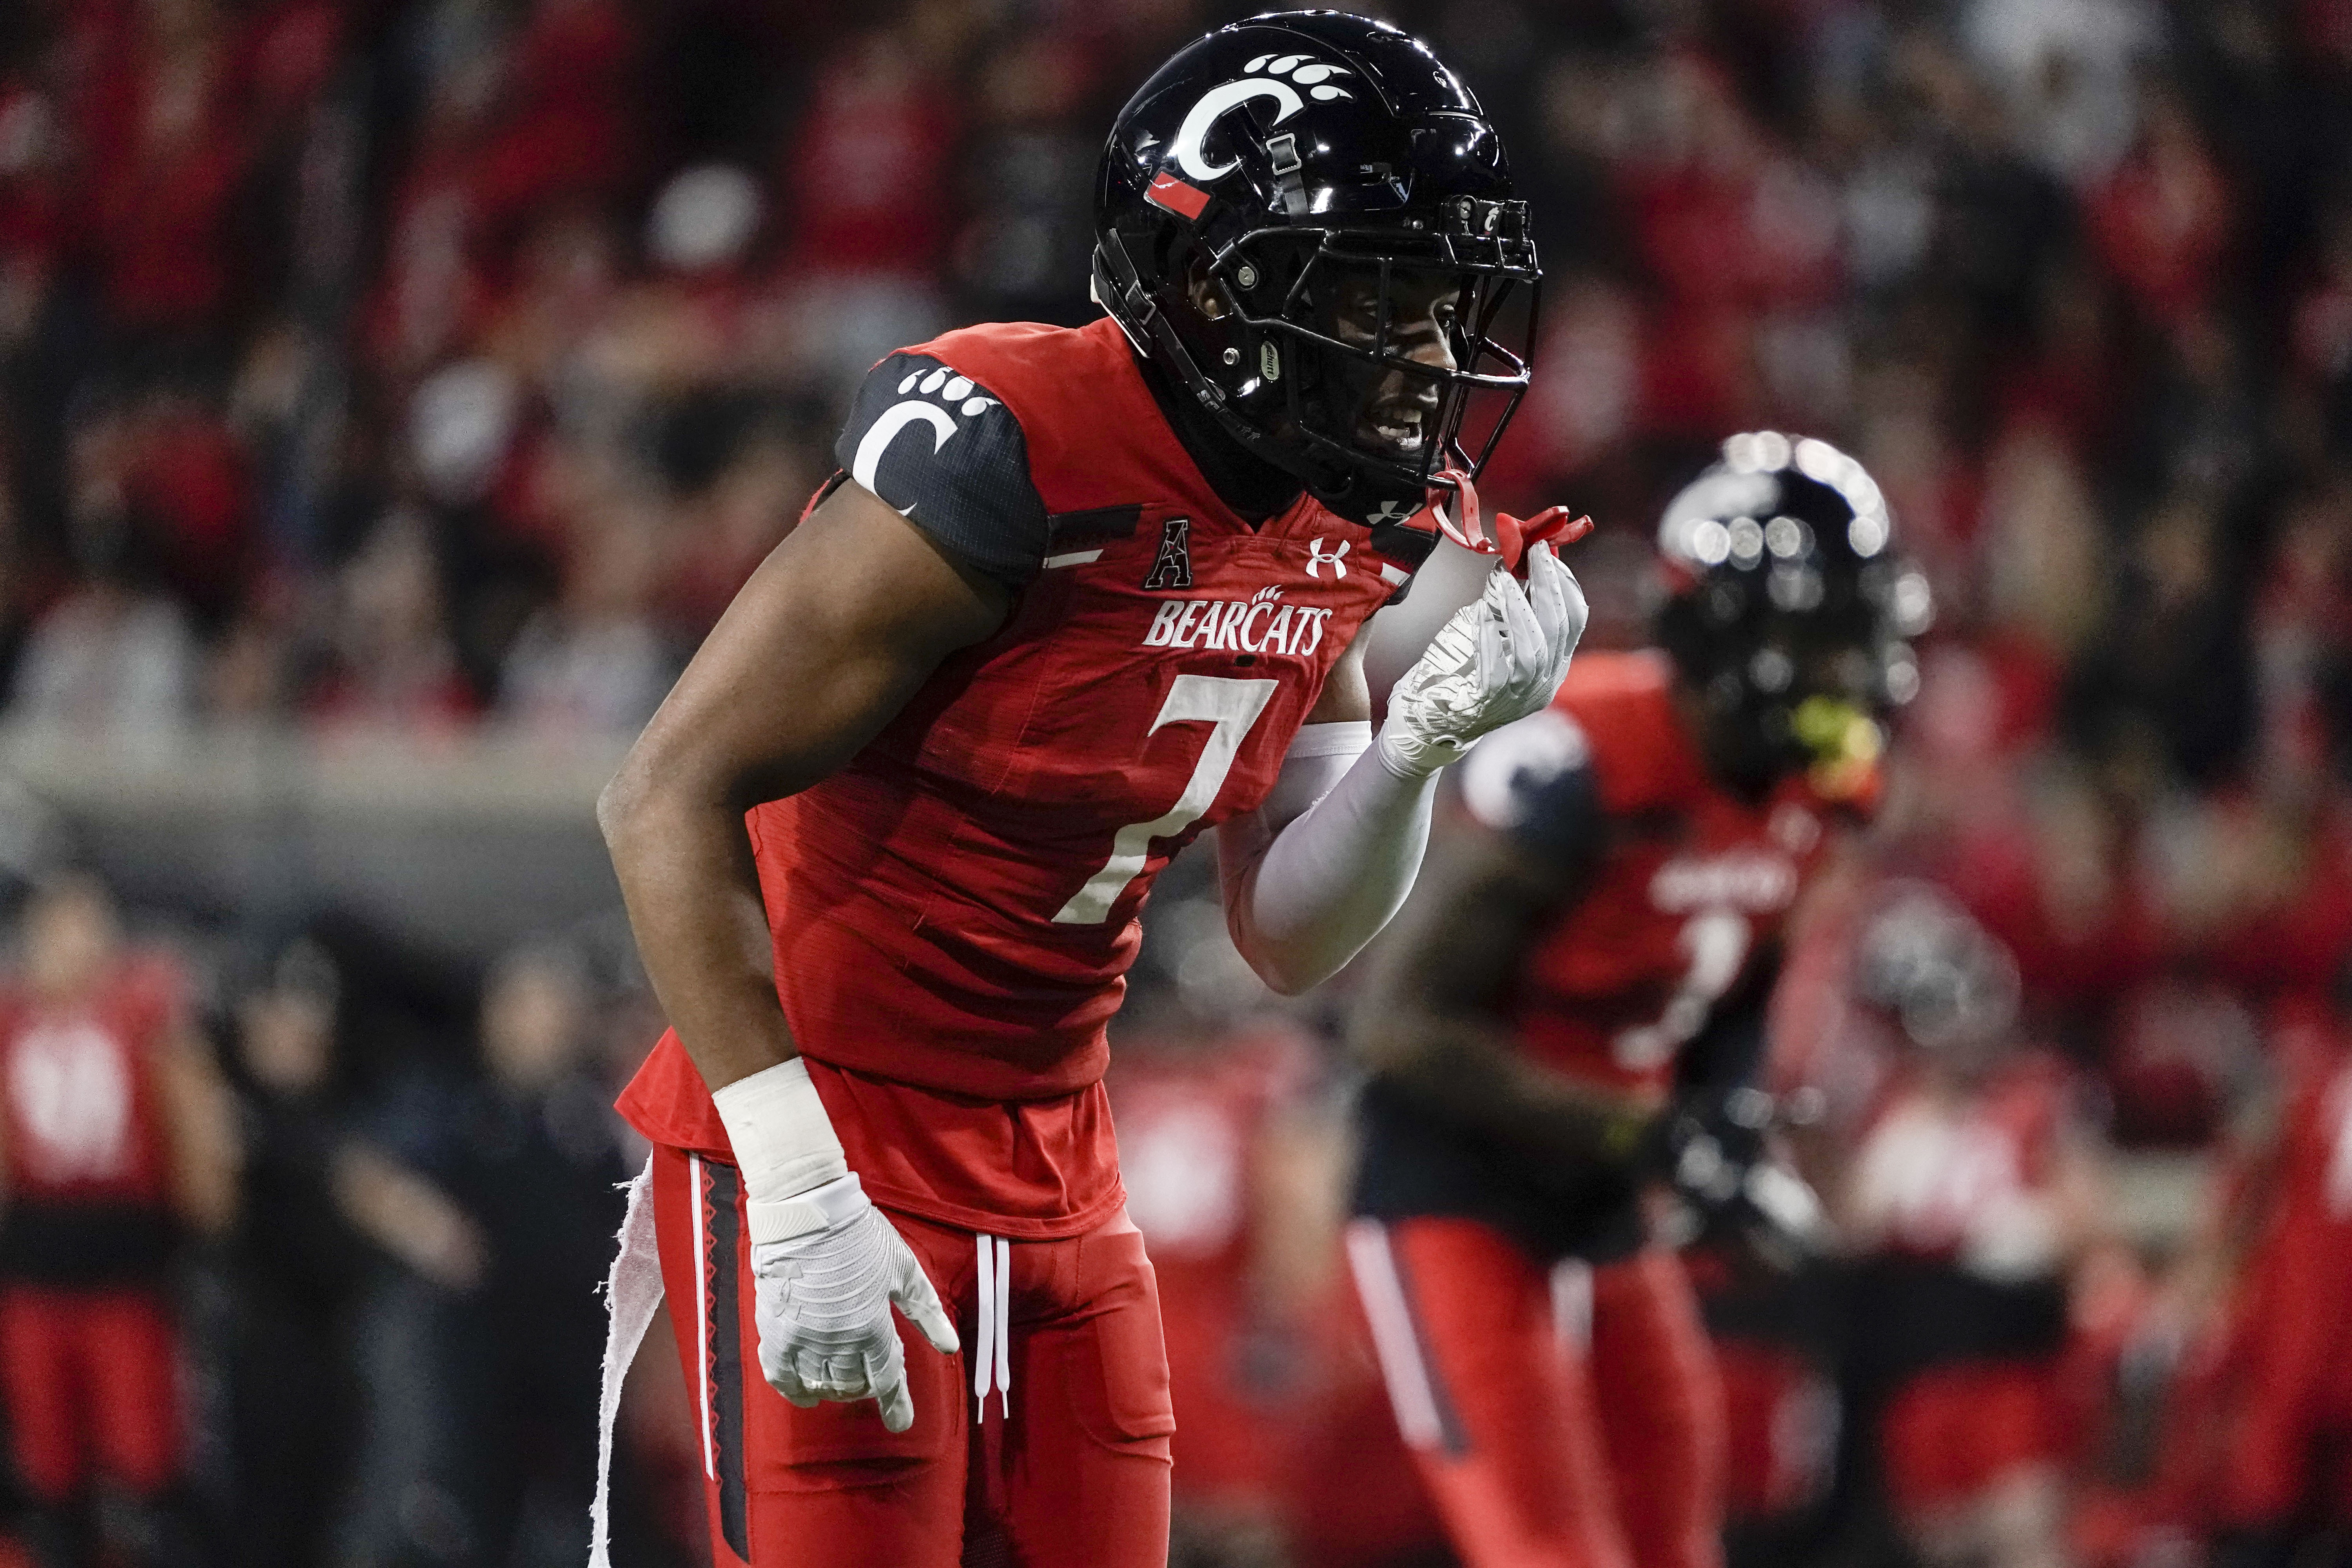 Bearcats make historic rise in College Football Playoff rankings